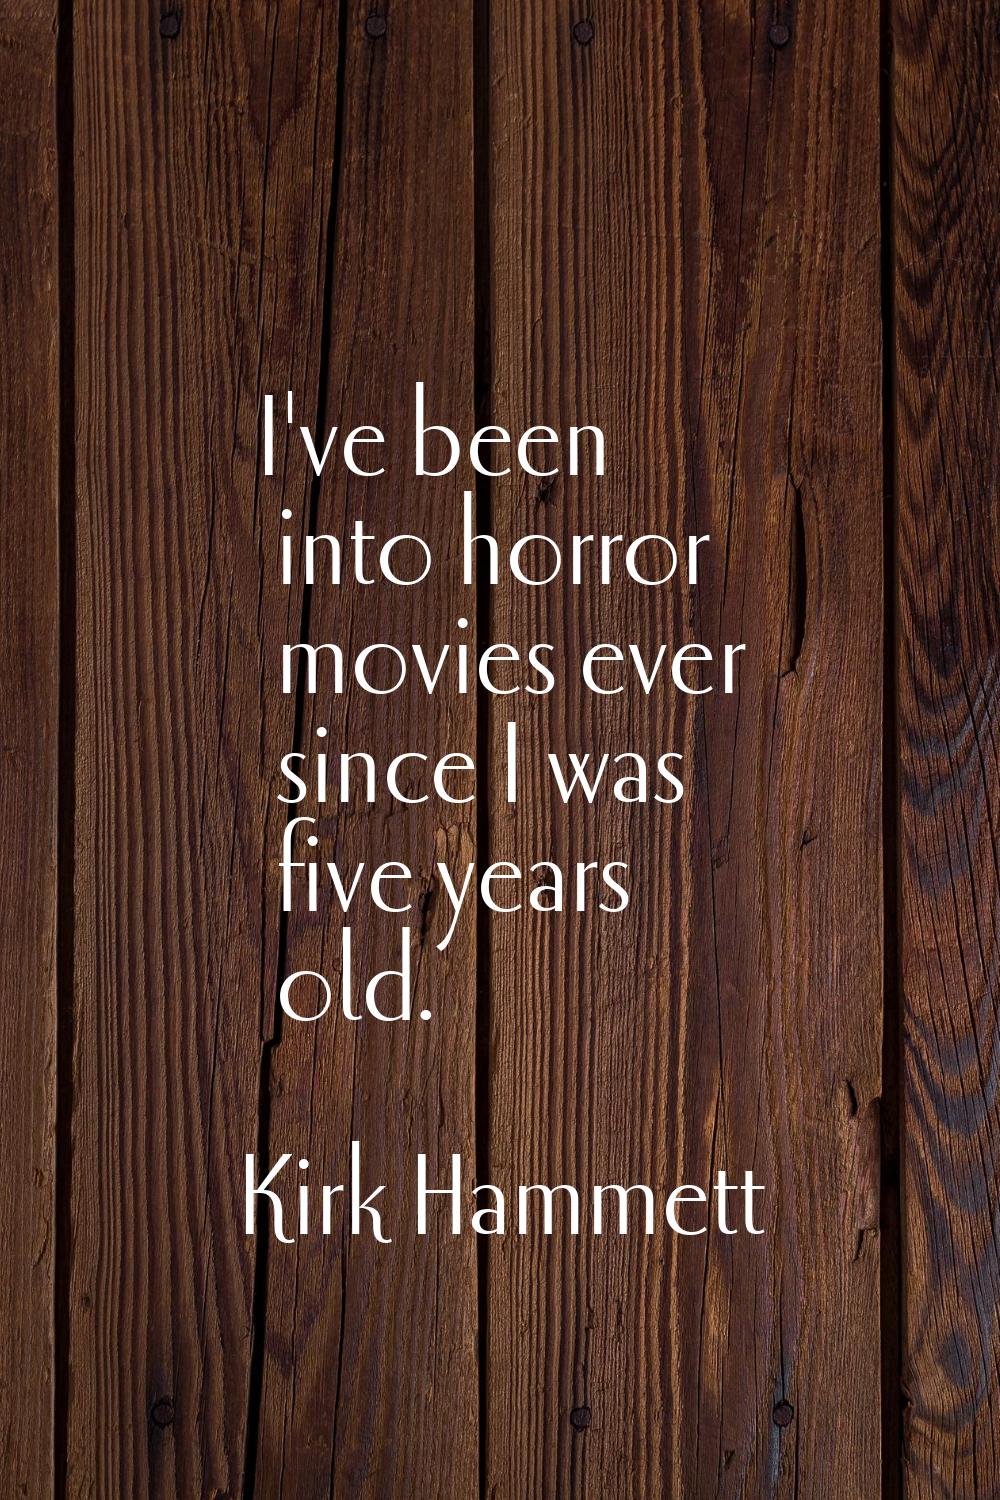 I've been into horror movies ever since I was five years old.